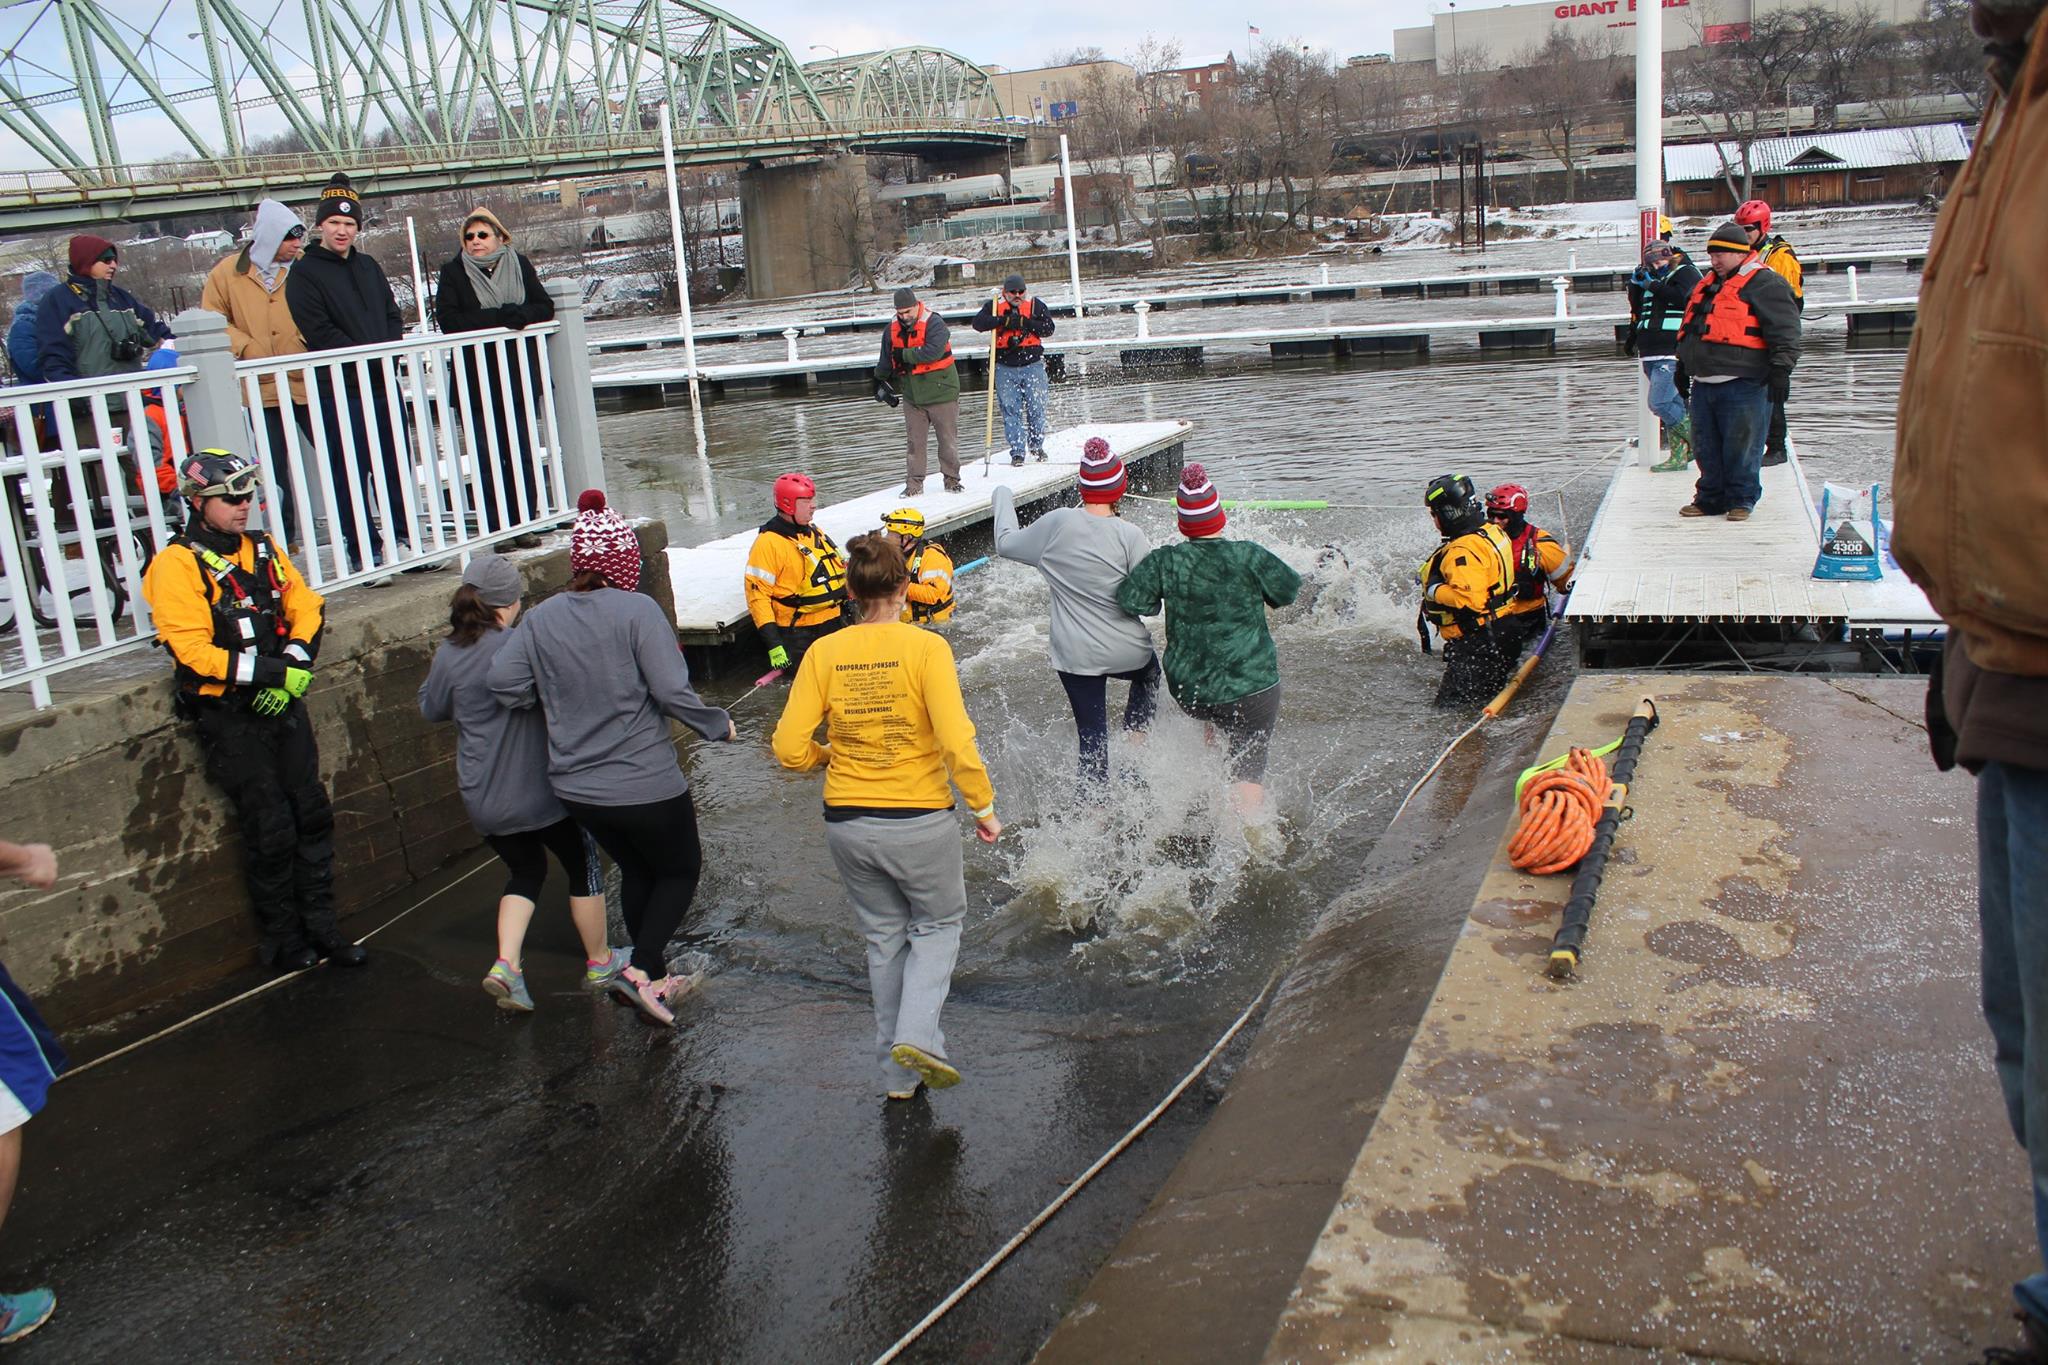 About Plunge - Special Olympics Pennsylvania